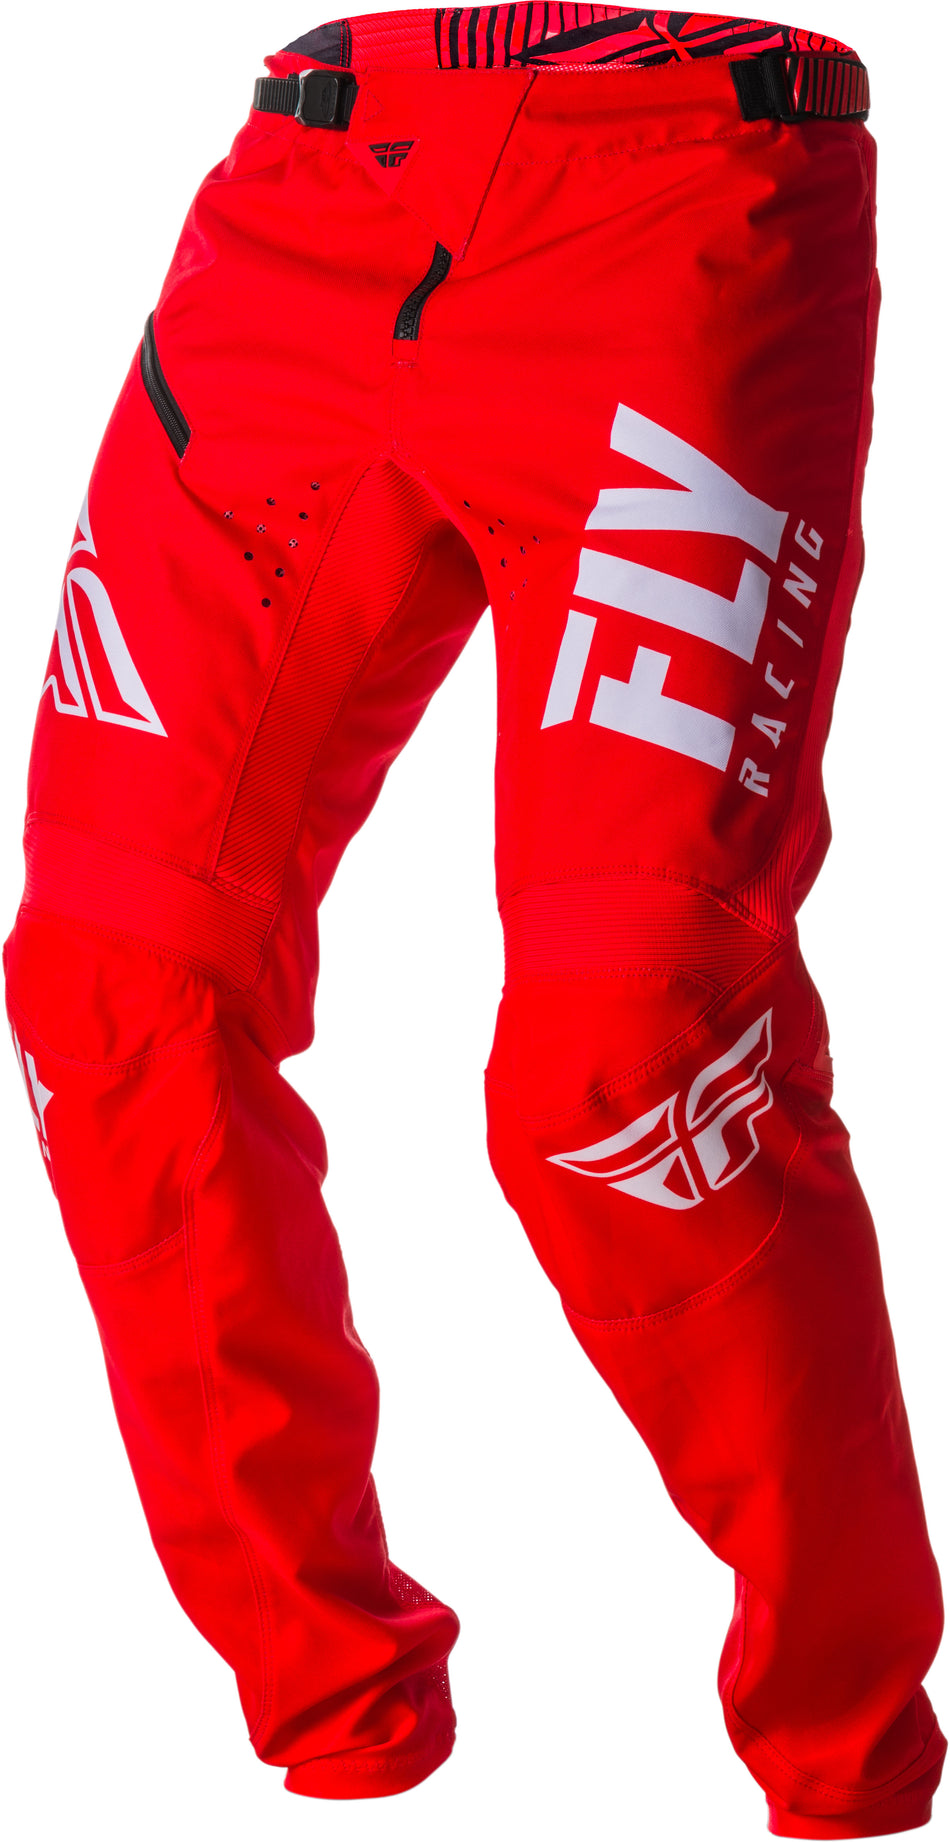 FLY RACING Kinetic Shield Bicycle Pants Red/White Sz 38 372-02238